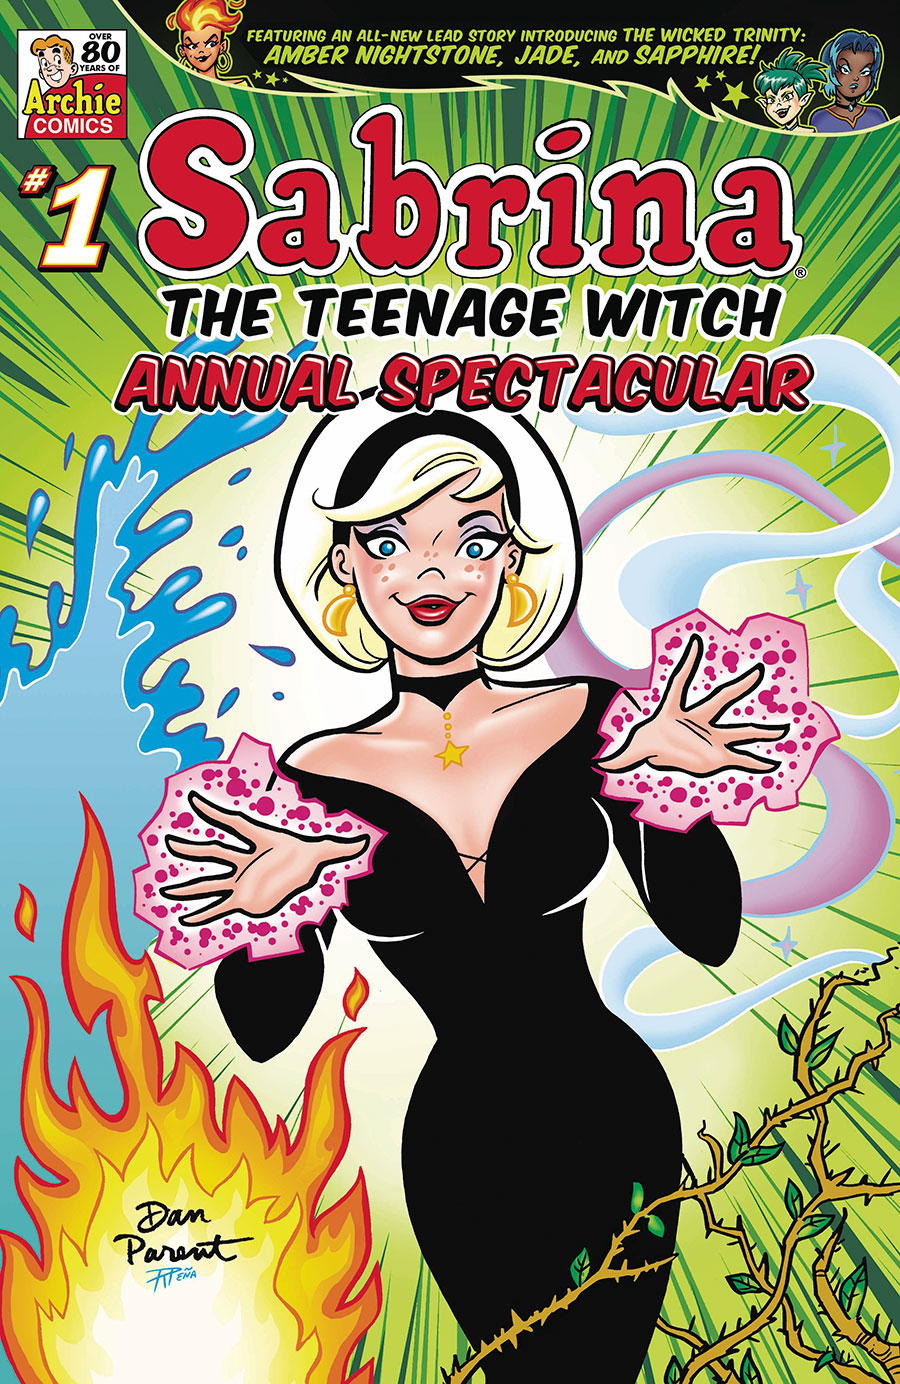 Sabrina The Teenage Witch Annual Spectacular #1 (One Shot)